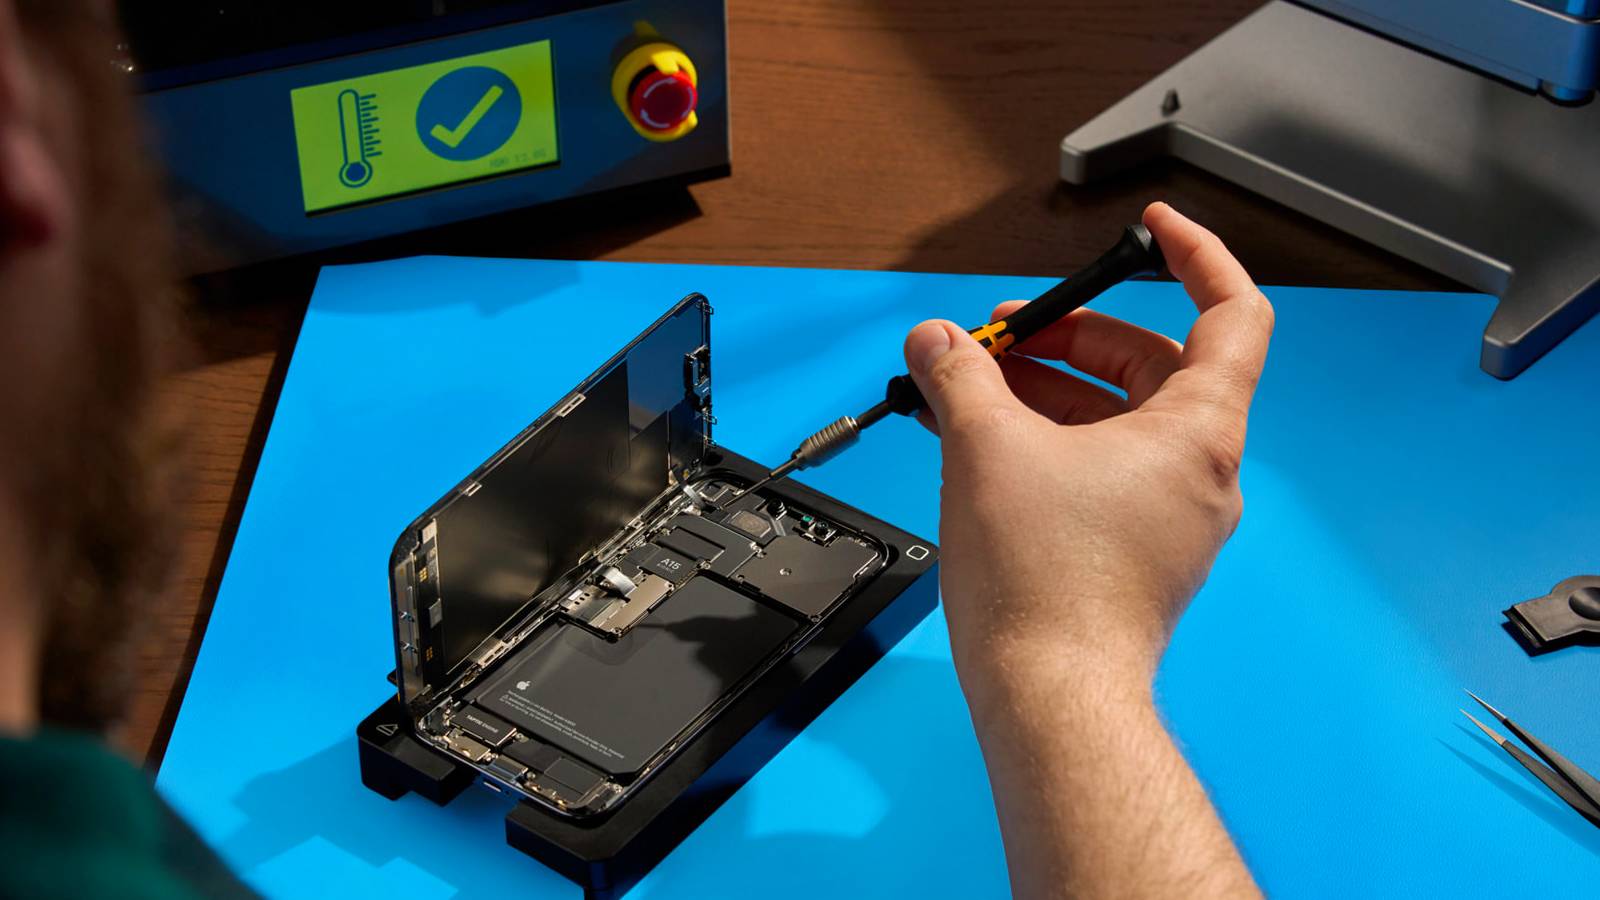 iFixit Says Apple’s Self Service Repair Program is Great Step, But Has a Catch